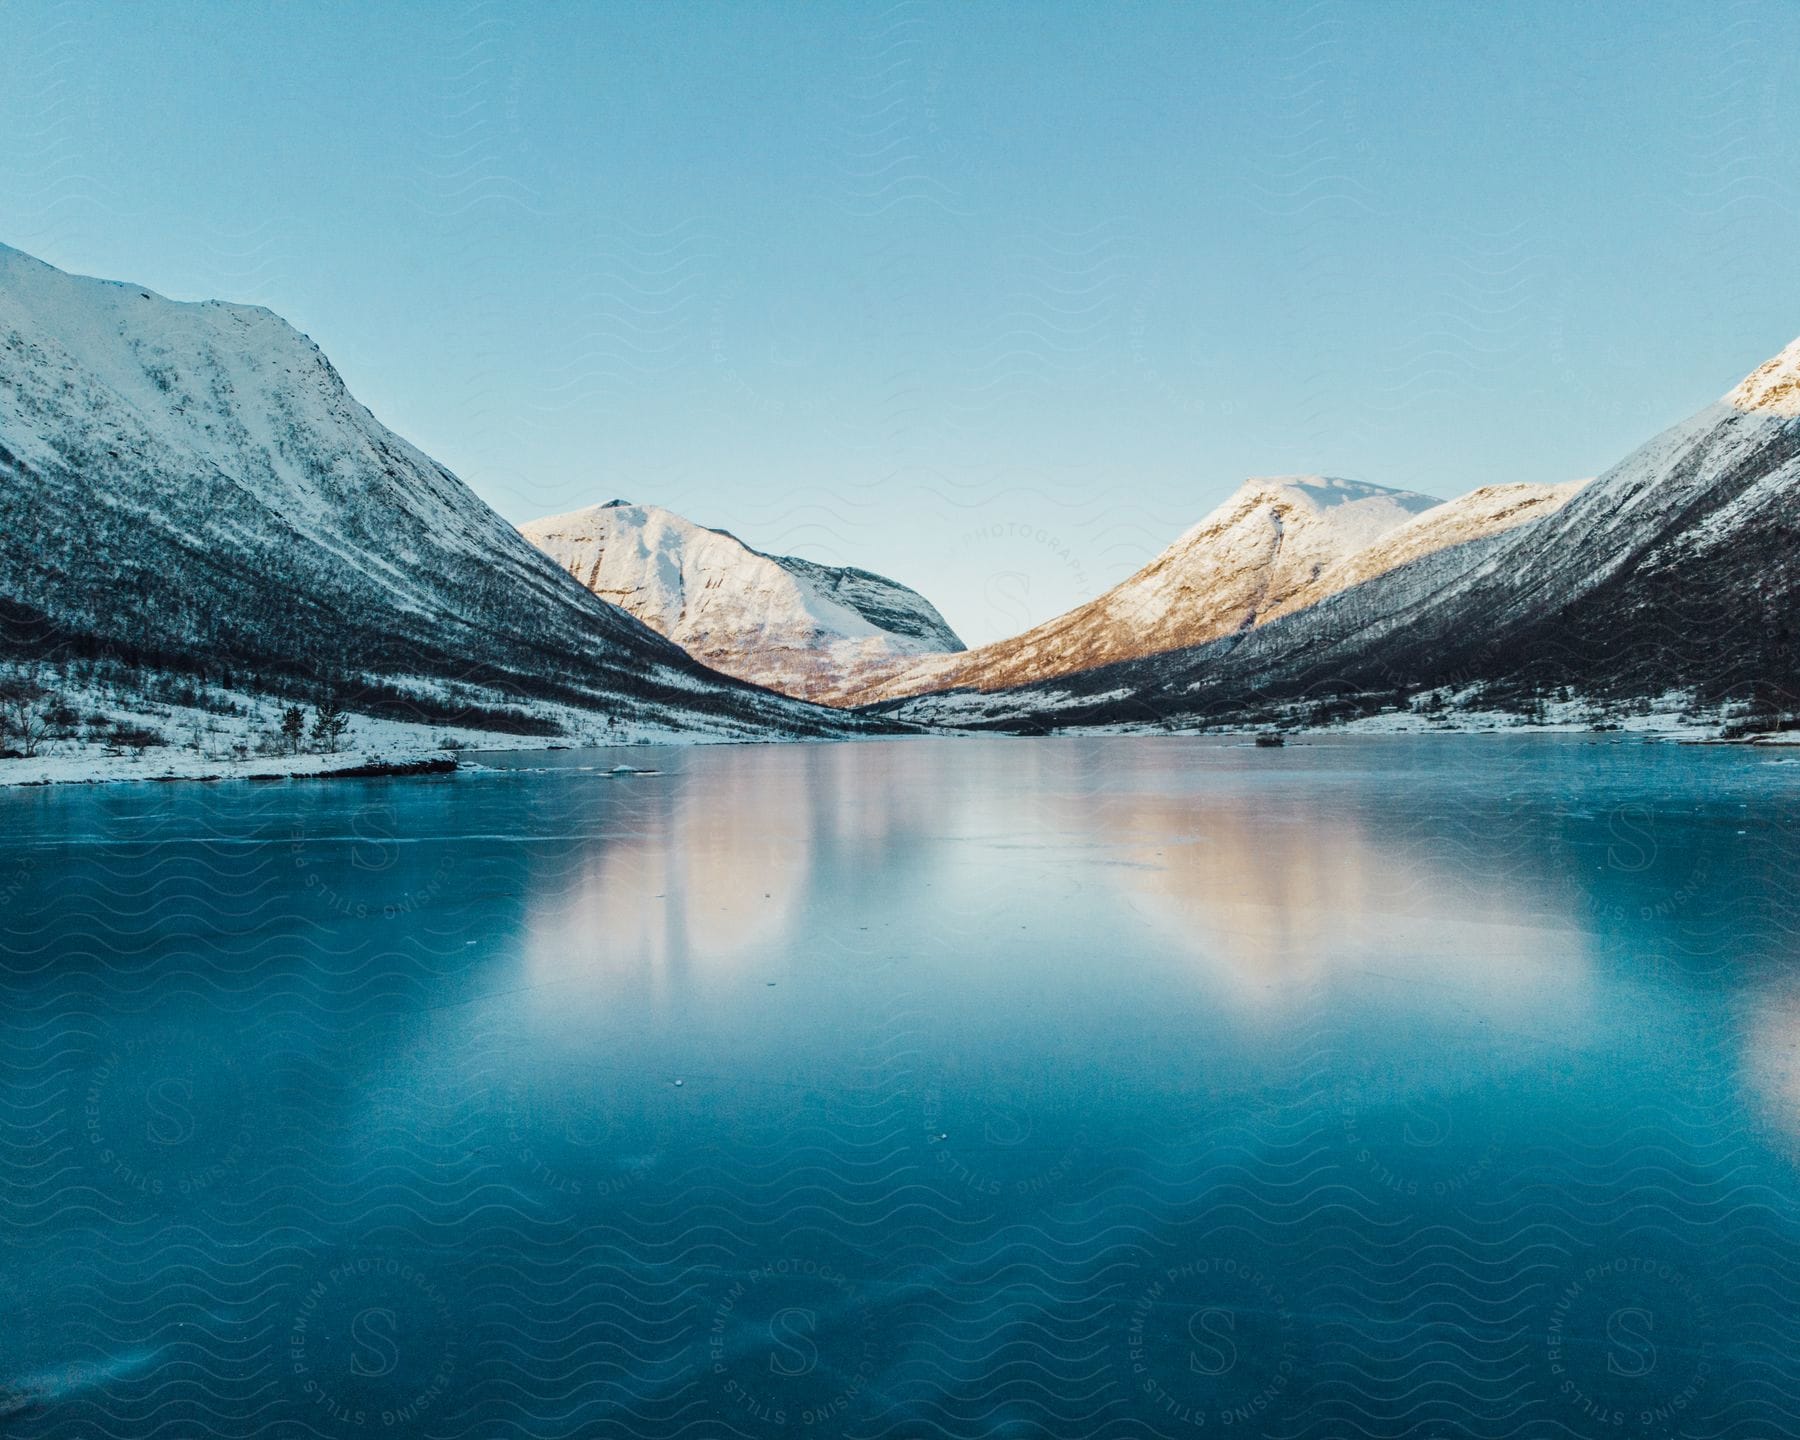 A serene winter landscape with a frozen lake surrounded by mountains and snow